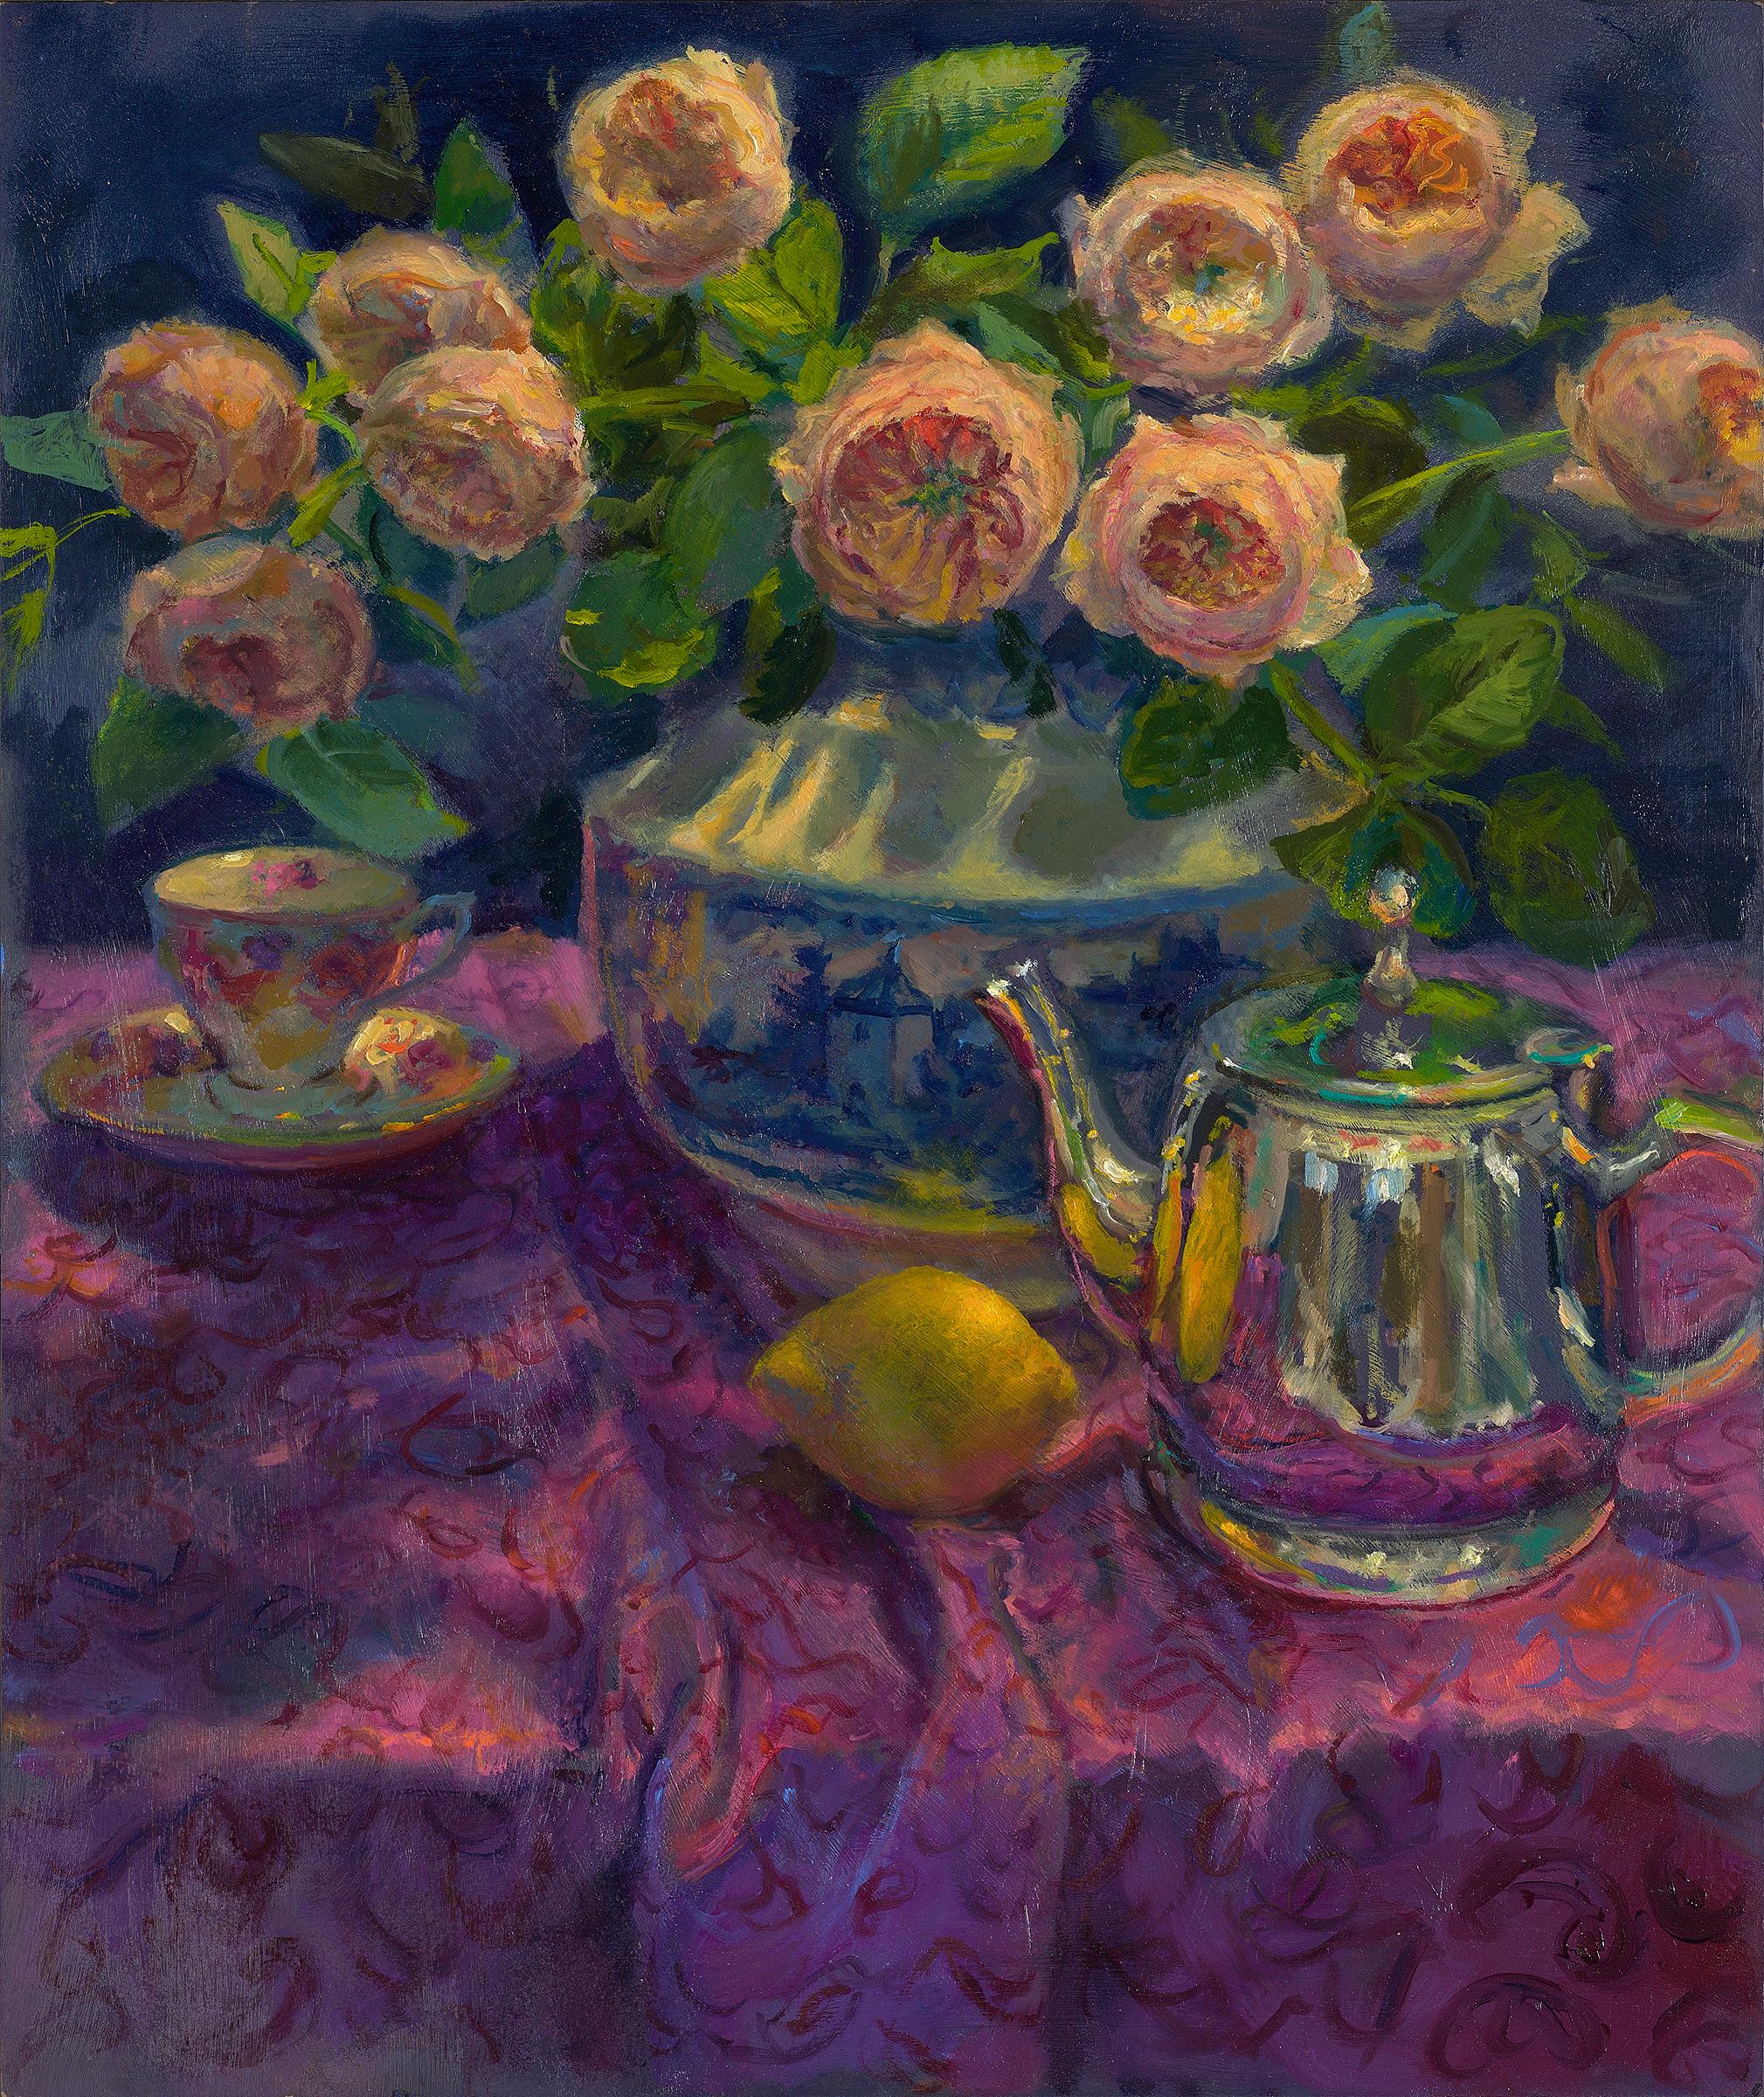 Home- 21st Century Contemporary Flower Still-life Painting with Roses